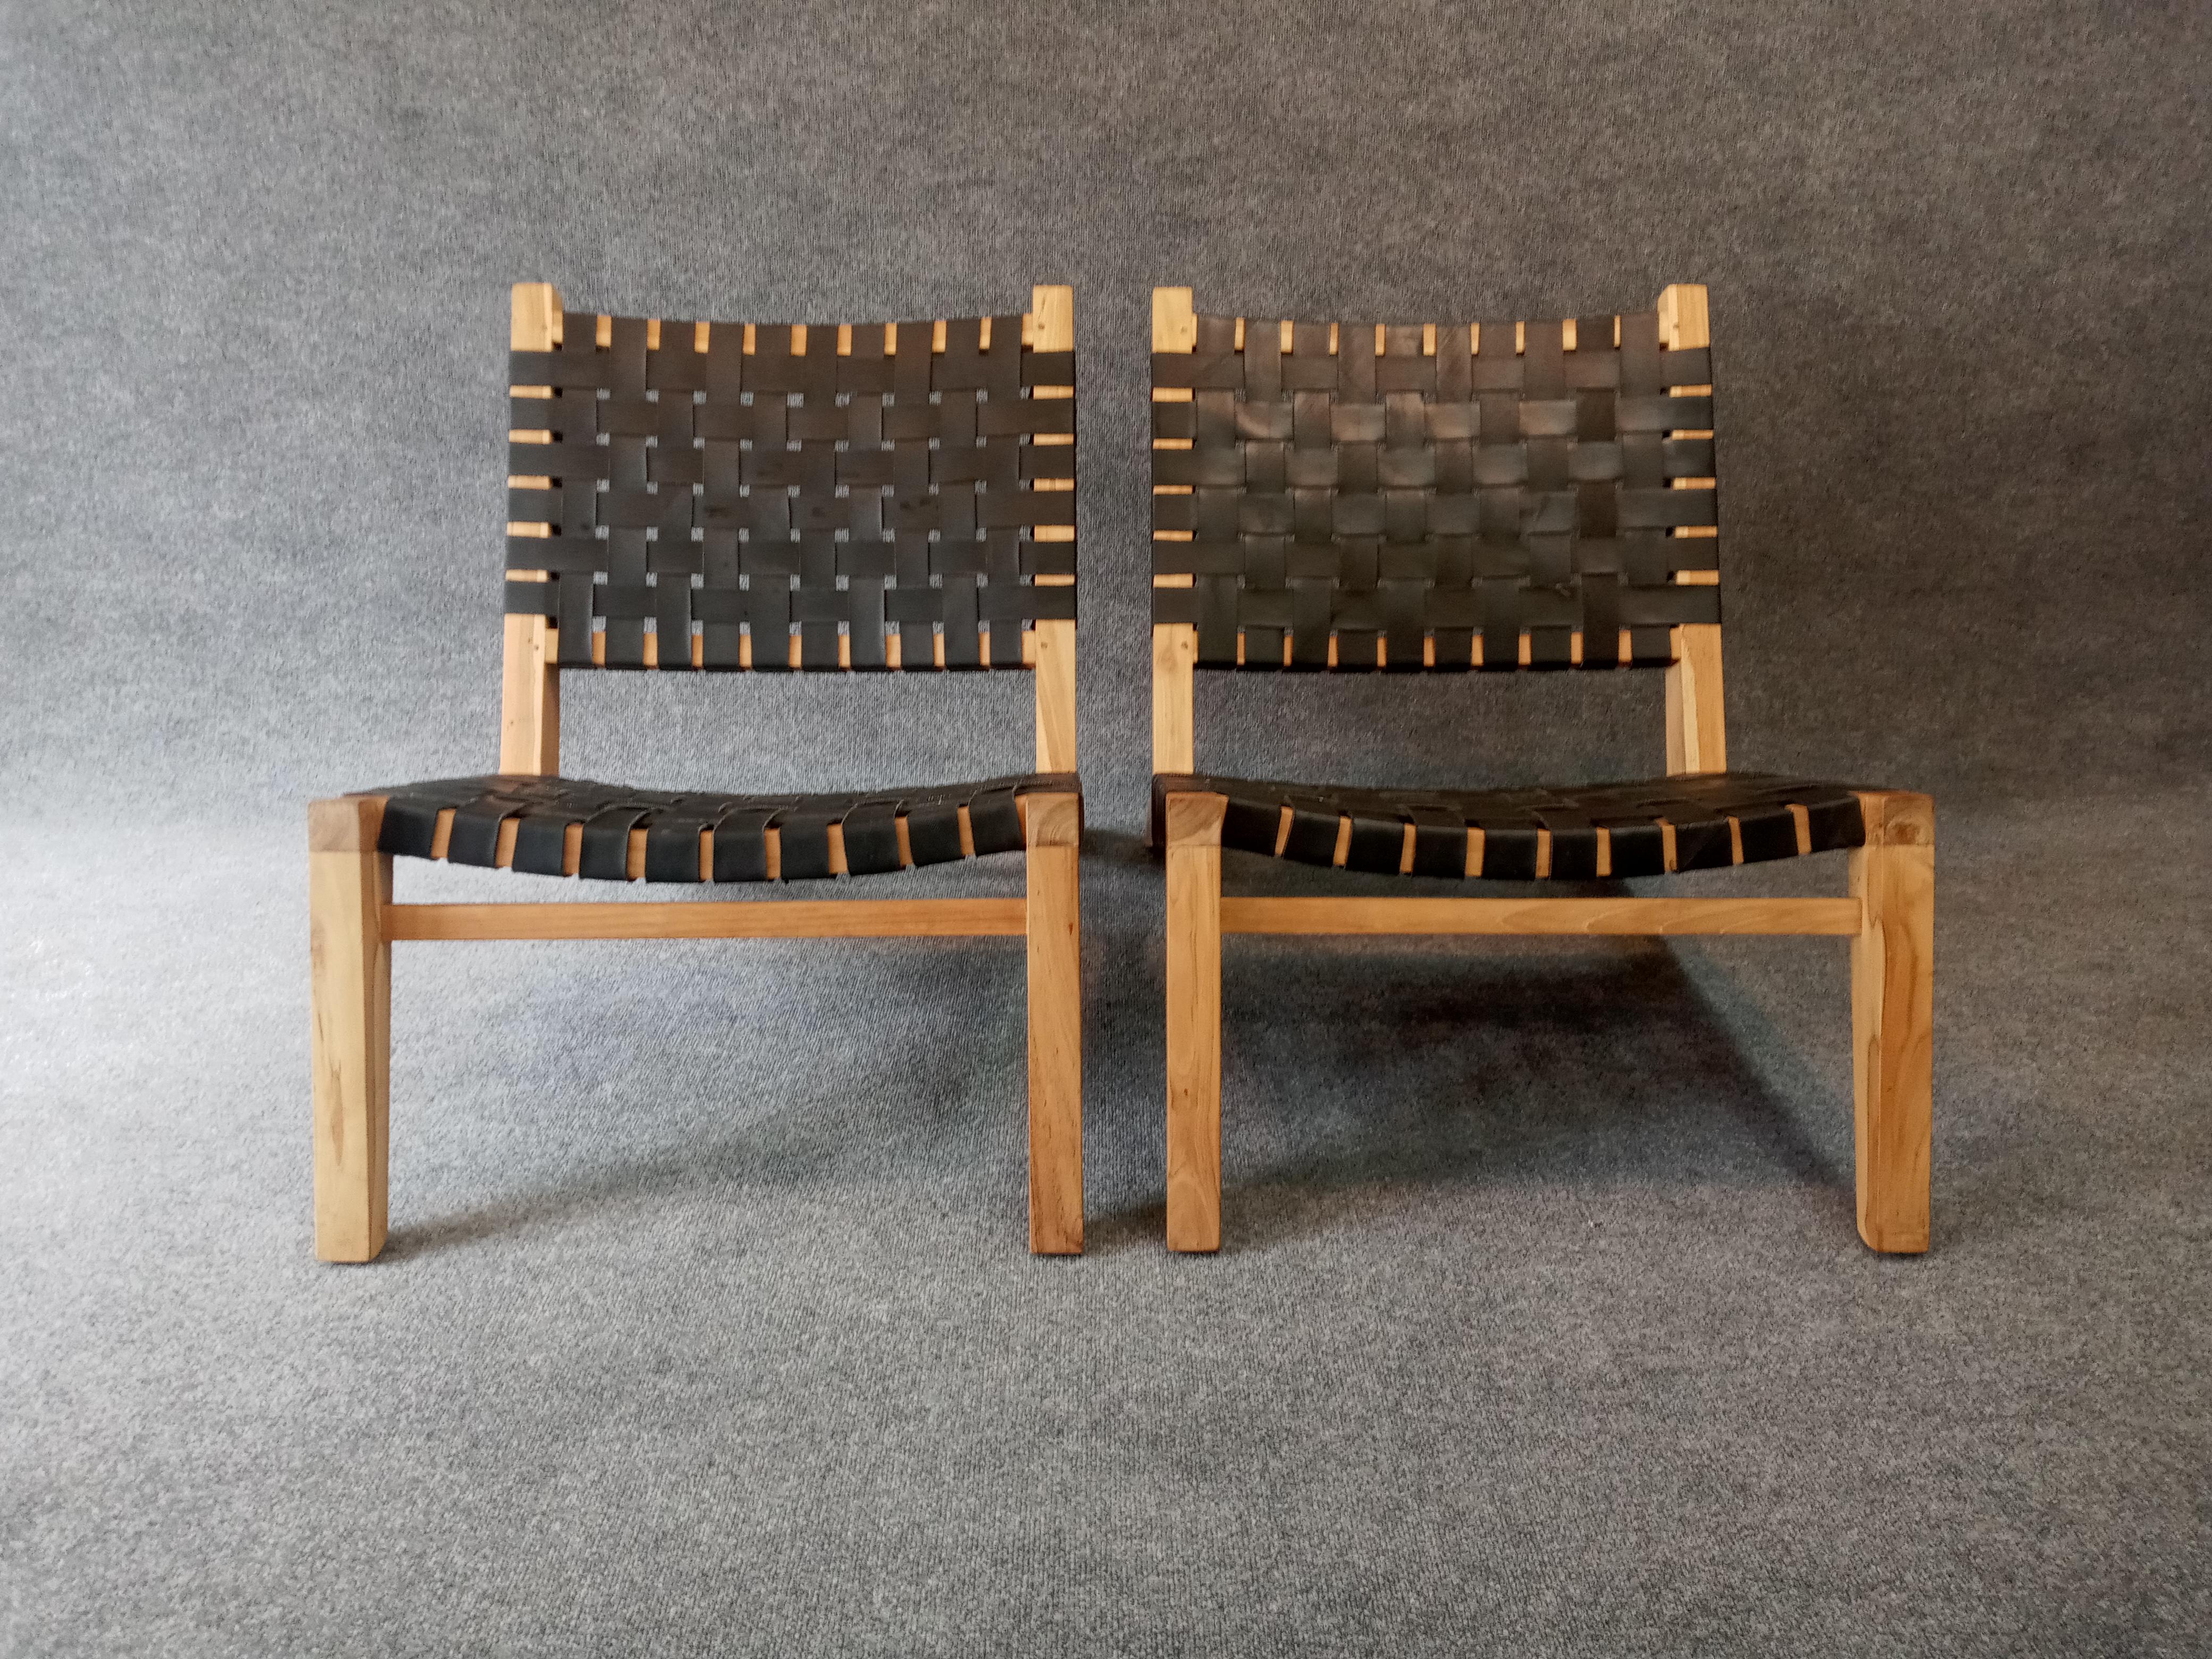 Pair of oiled teak and rubber strapping classic Grasshopper lounge chairs. Made in Brooklyn, these chairs tout a 